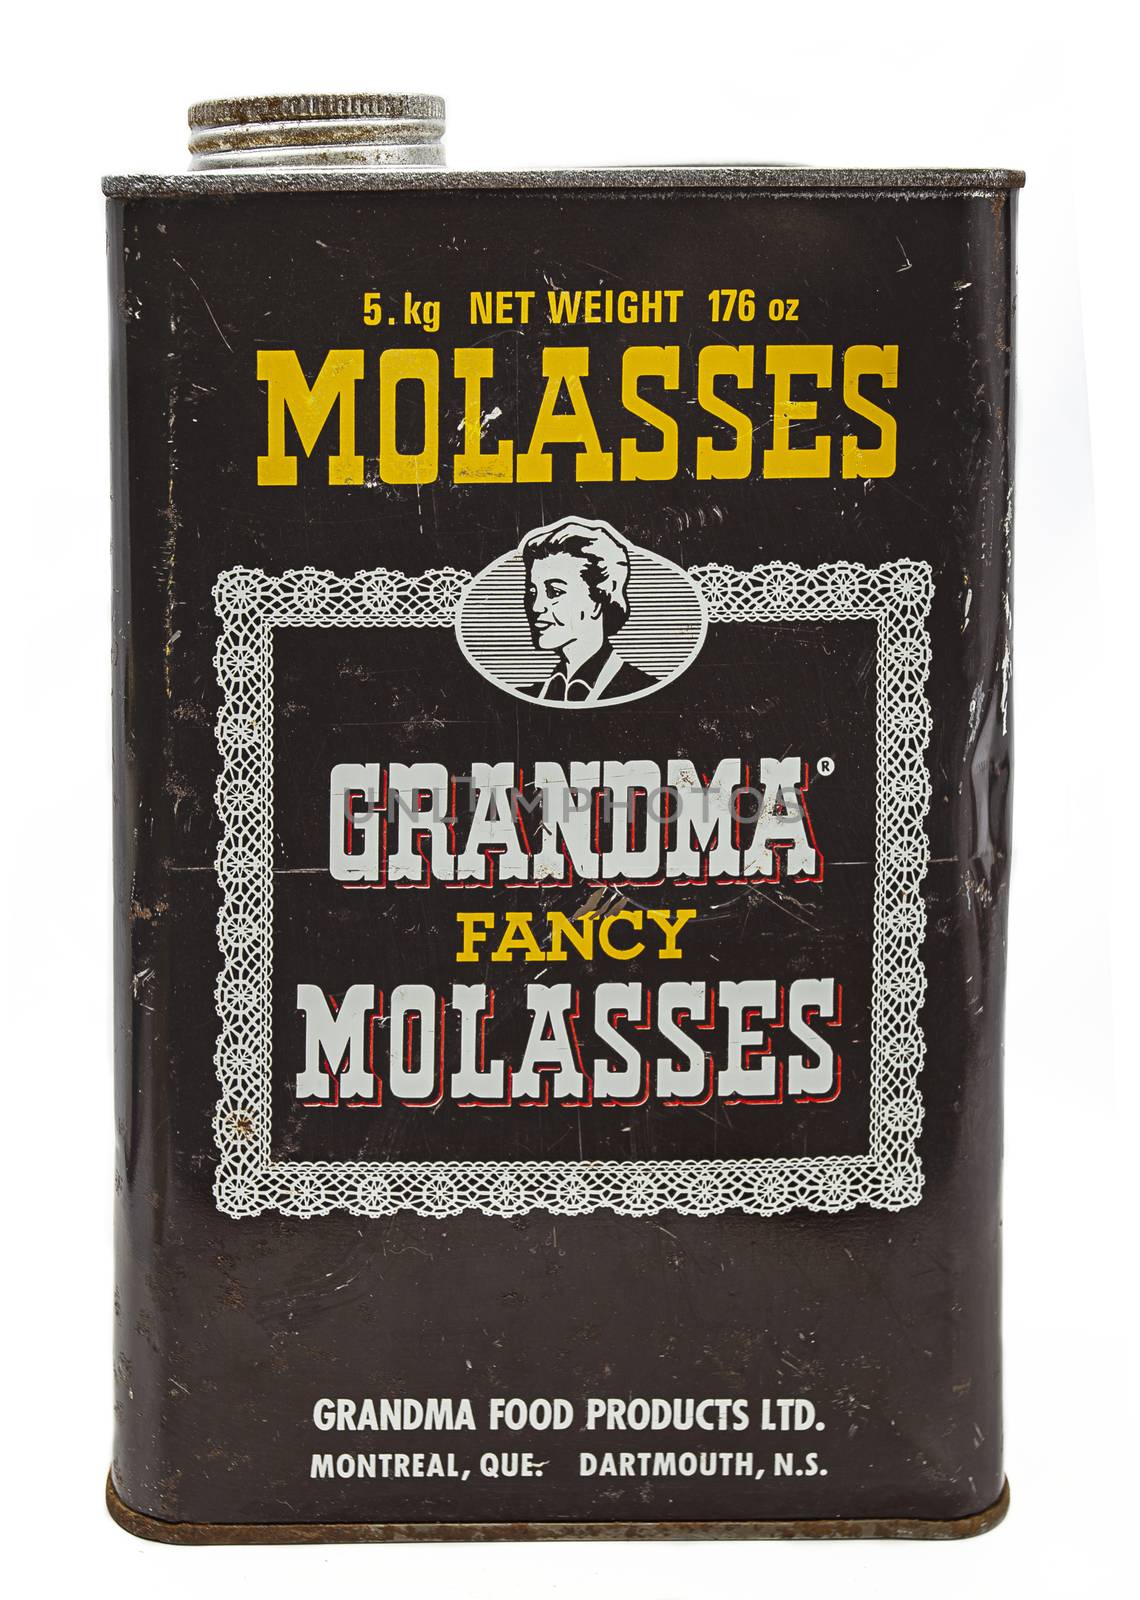 metal box of molasses against a white background